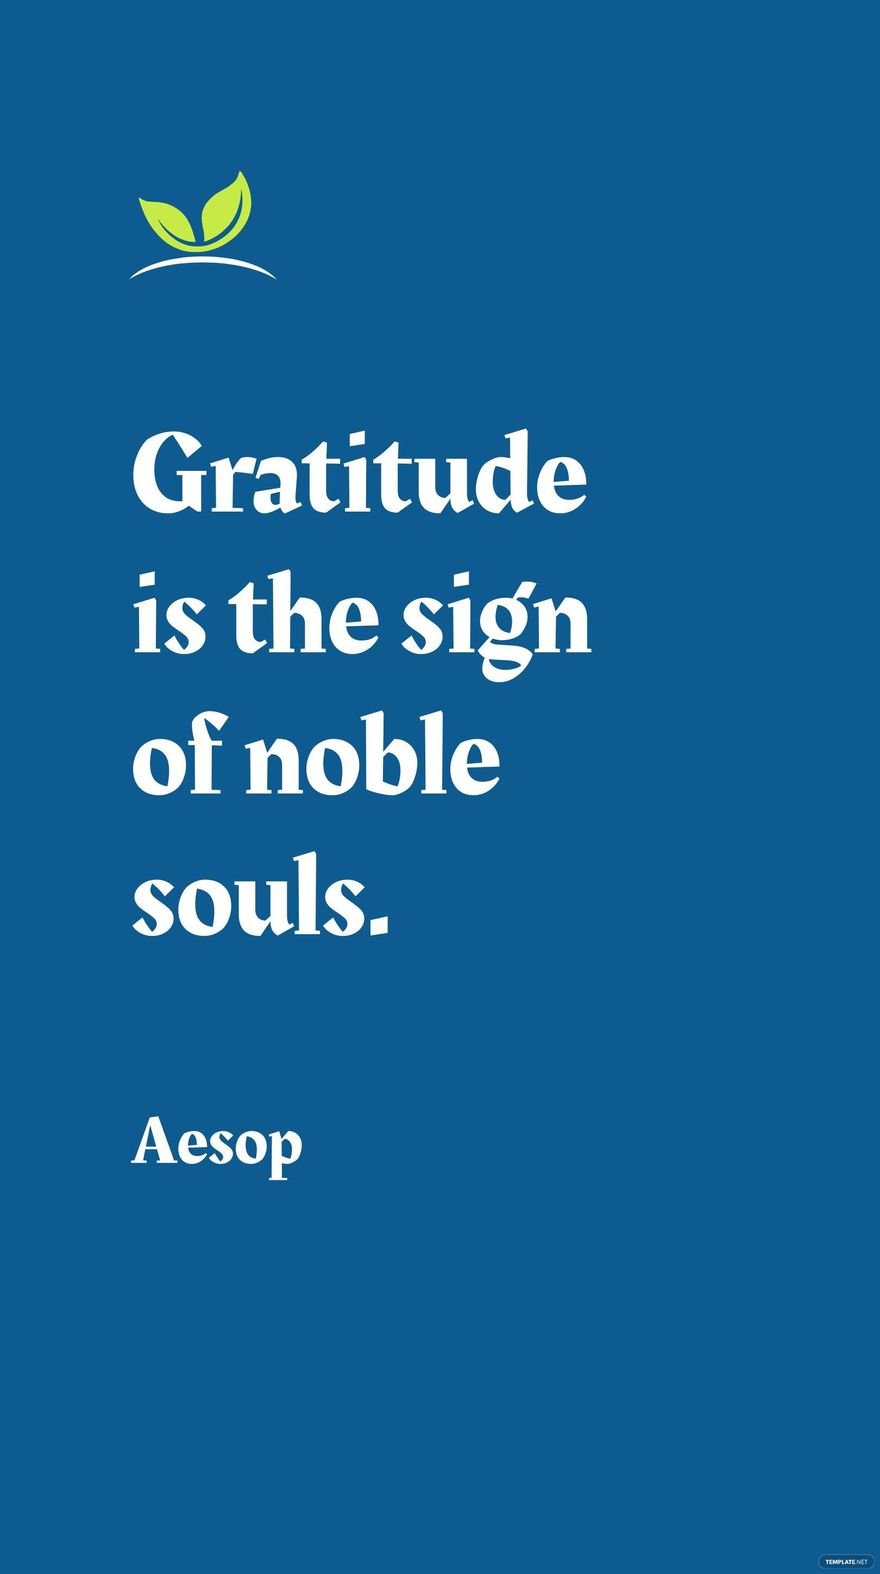 Free Aesop - Gratitude is the sign of noble souls. in JPG